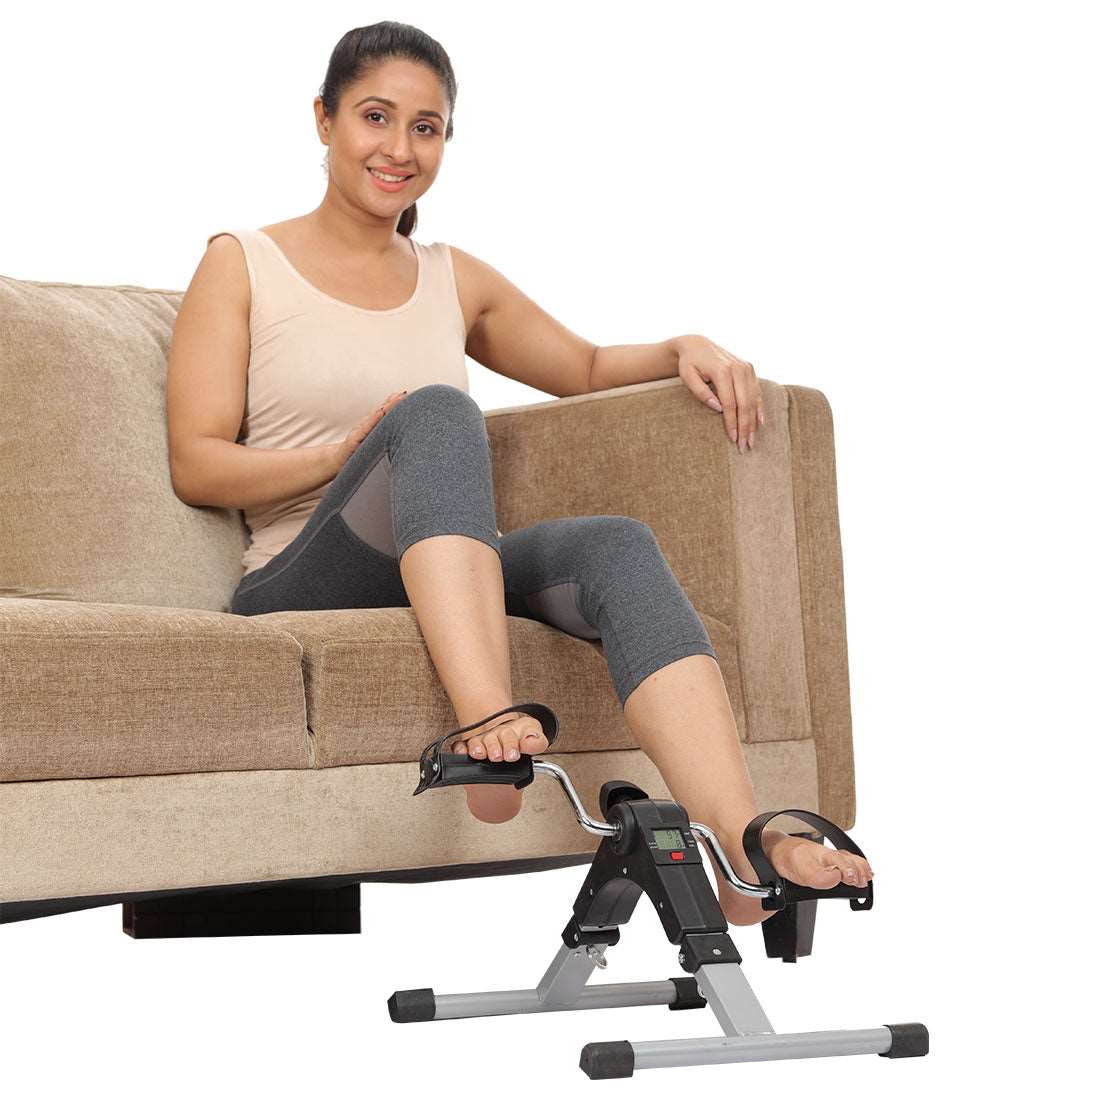 Pedal Exercise Cycle with Digital Display - JSB Healthcare 